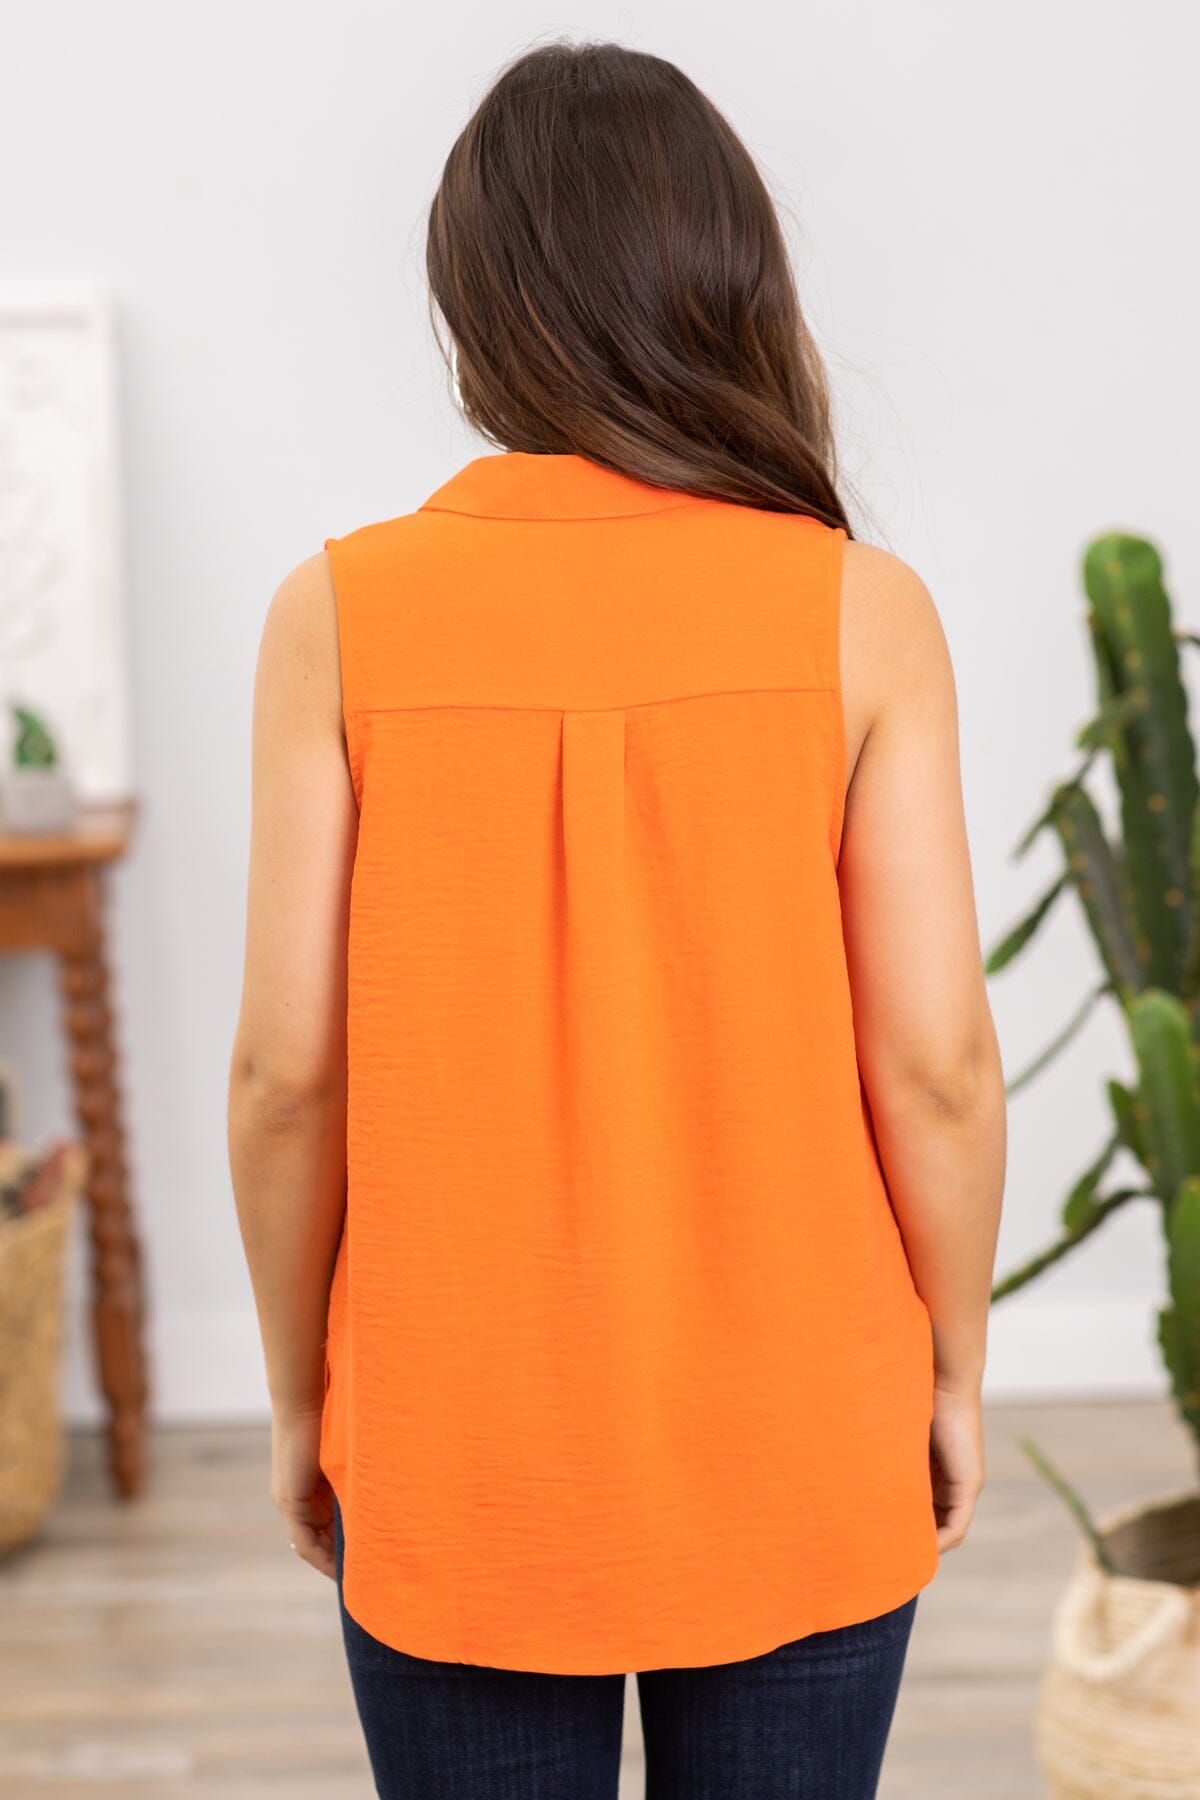 Orange Collared Sleeveless Top With Pocket - Filly Flair